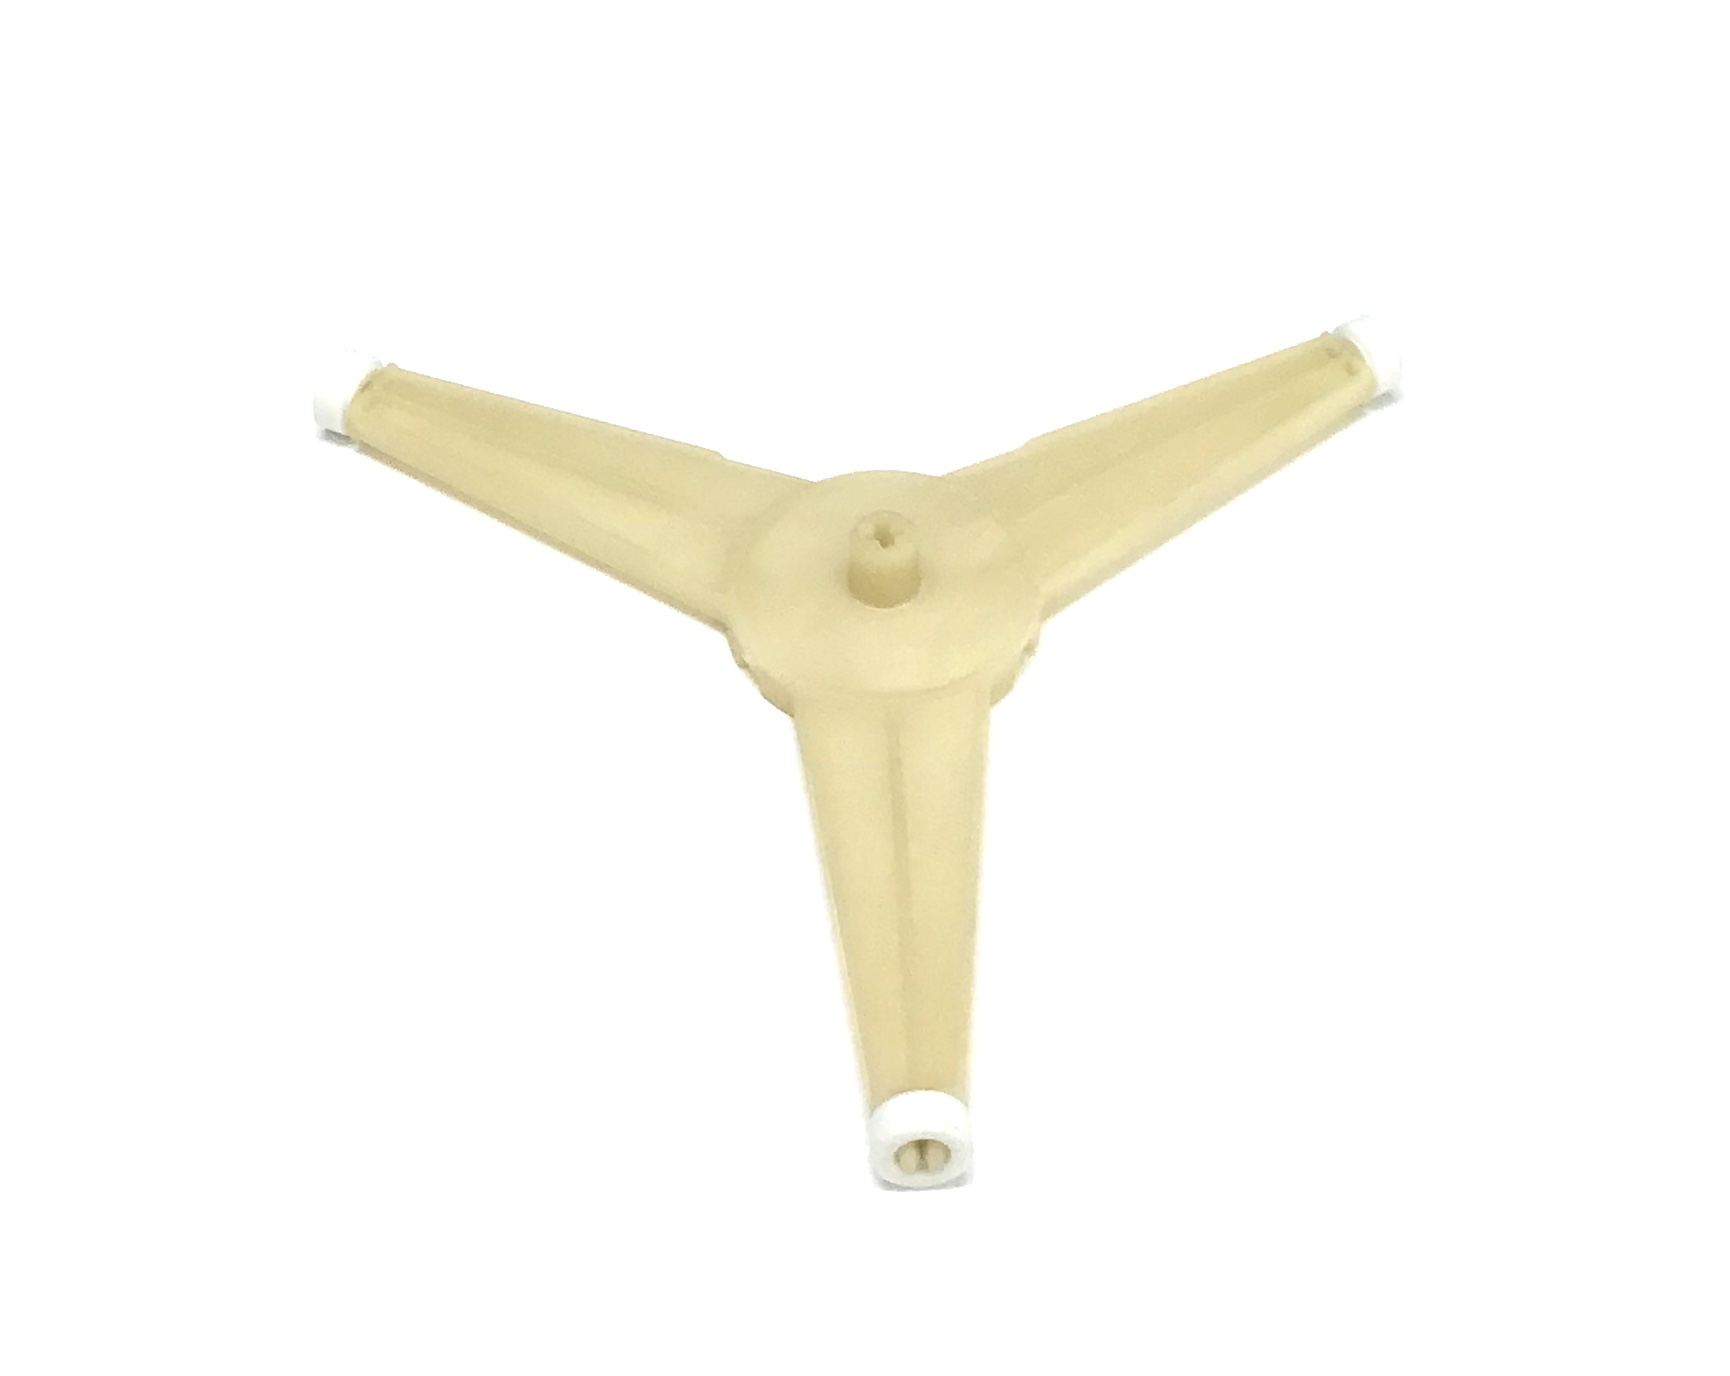 Sharp OEM Sharp Microwave Turntable Support Ring Turner Originally Shipped With R1461A, R-1461A